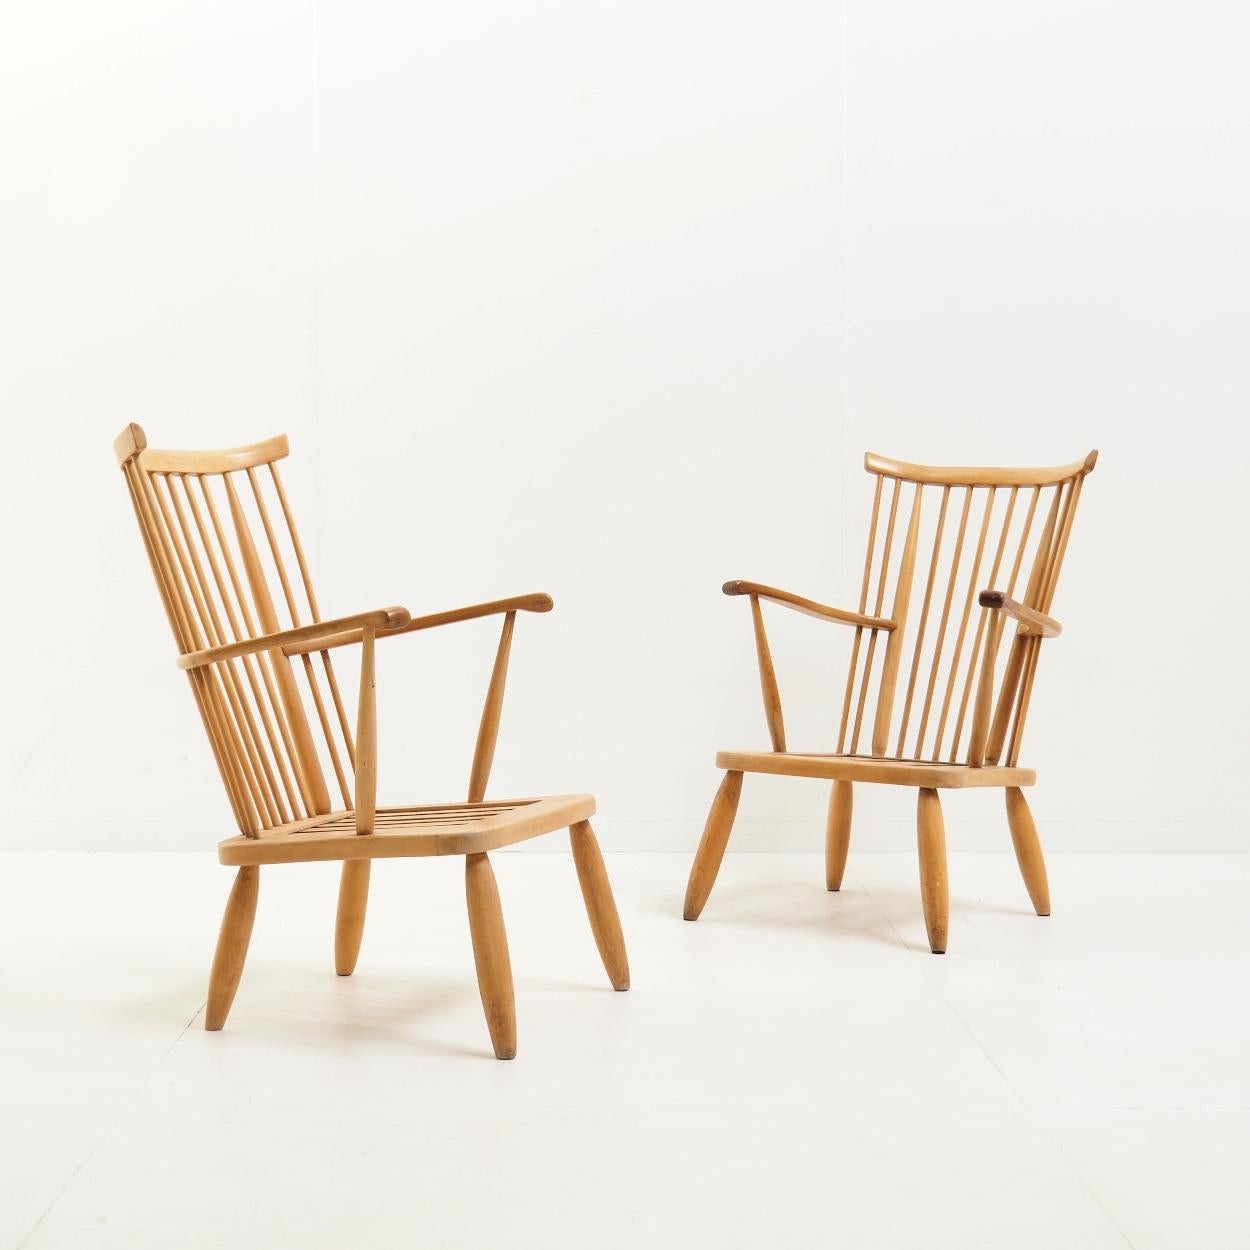 Very rare set of shaker styled wingback chairs. Their robust and simple architecture gives these chairs a brutalist or Japandi look. I’ve never seen a set like this before.

The chairs are made of light coloured beech wood and they are very